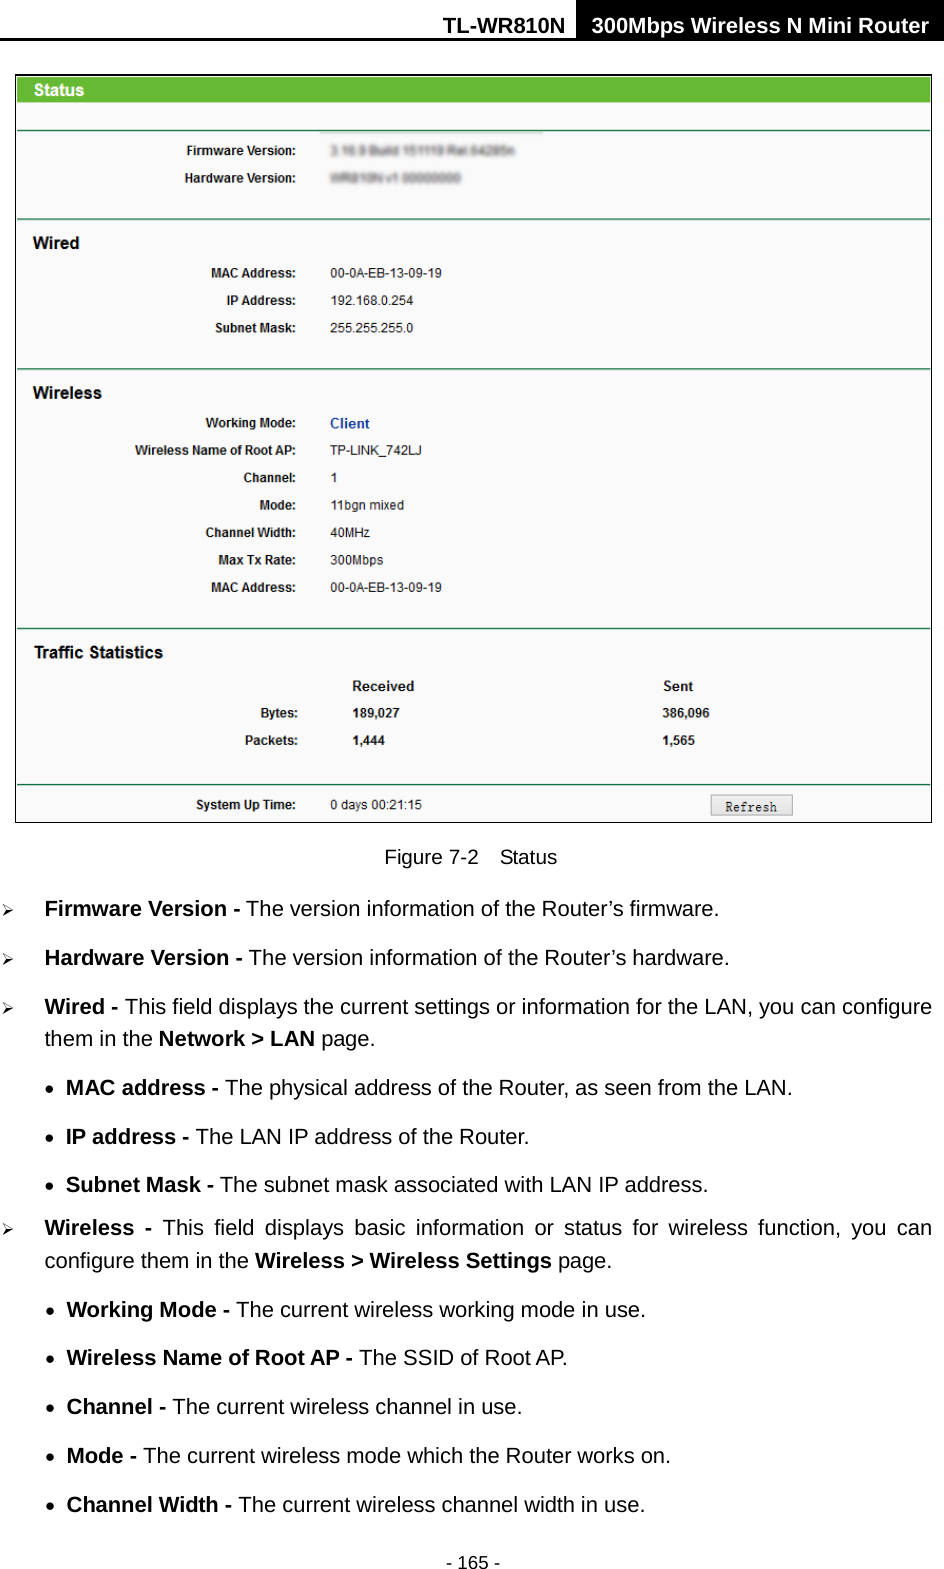 TL-WR810N 300Mbps Wireless N Mini Router  - 165 -  Figure 7-2  Status  Firmware Version - The version information of the Router’s firmware.  Hardware Version - The version information of the Router’s hardware.  Wired - This field displays the current settings or information for the LAN, you can configure them in the Network &gt; LAN page.   • MAC address - The physical address of the Router, as seen from the LAN. • IP address - The LAN IP address of the Router. • Subnet Mask - The subnet mask associated with LAN IP address.  Wireless -  This field displays basic information or status for wireless function, you can configure them in the Wireless &gt; Wireless Settings page.   • Working Mode - The current wireless working mode in use. • Wireless Name of Root AP - The SSID of Root AP. • Channel - The current wireless channel in use. • Mode - The current wireless mode which the Router works on. • Channel Width - The current wireless channel width in use. 